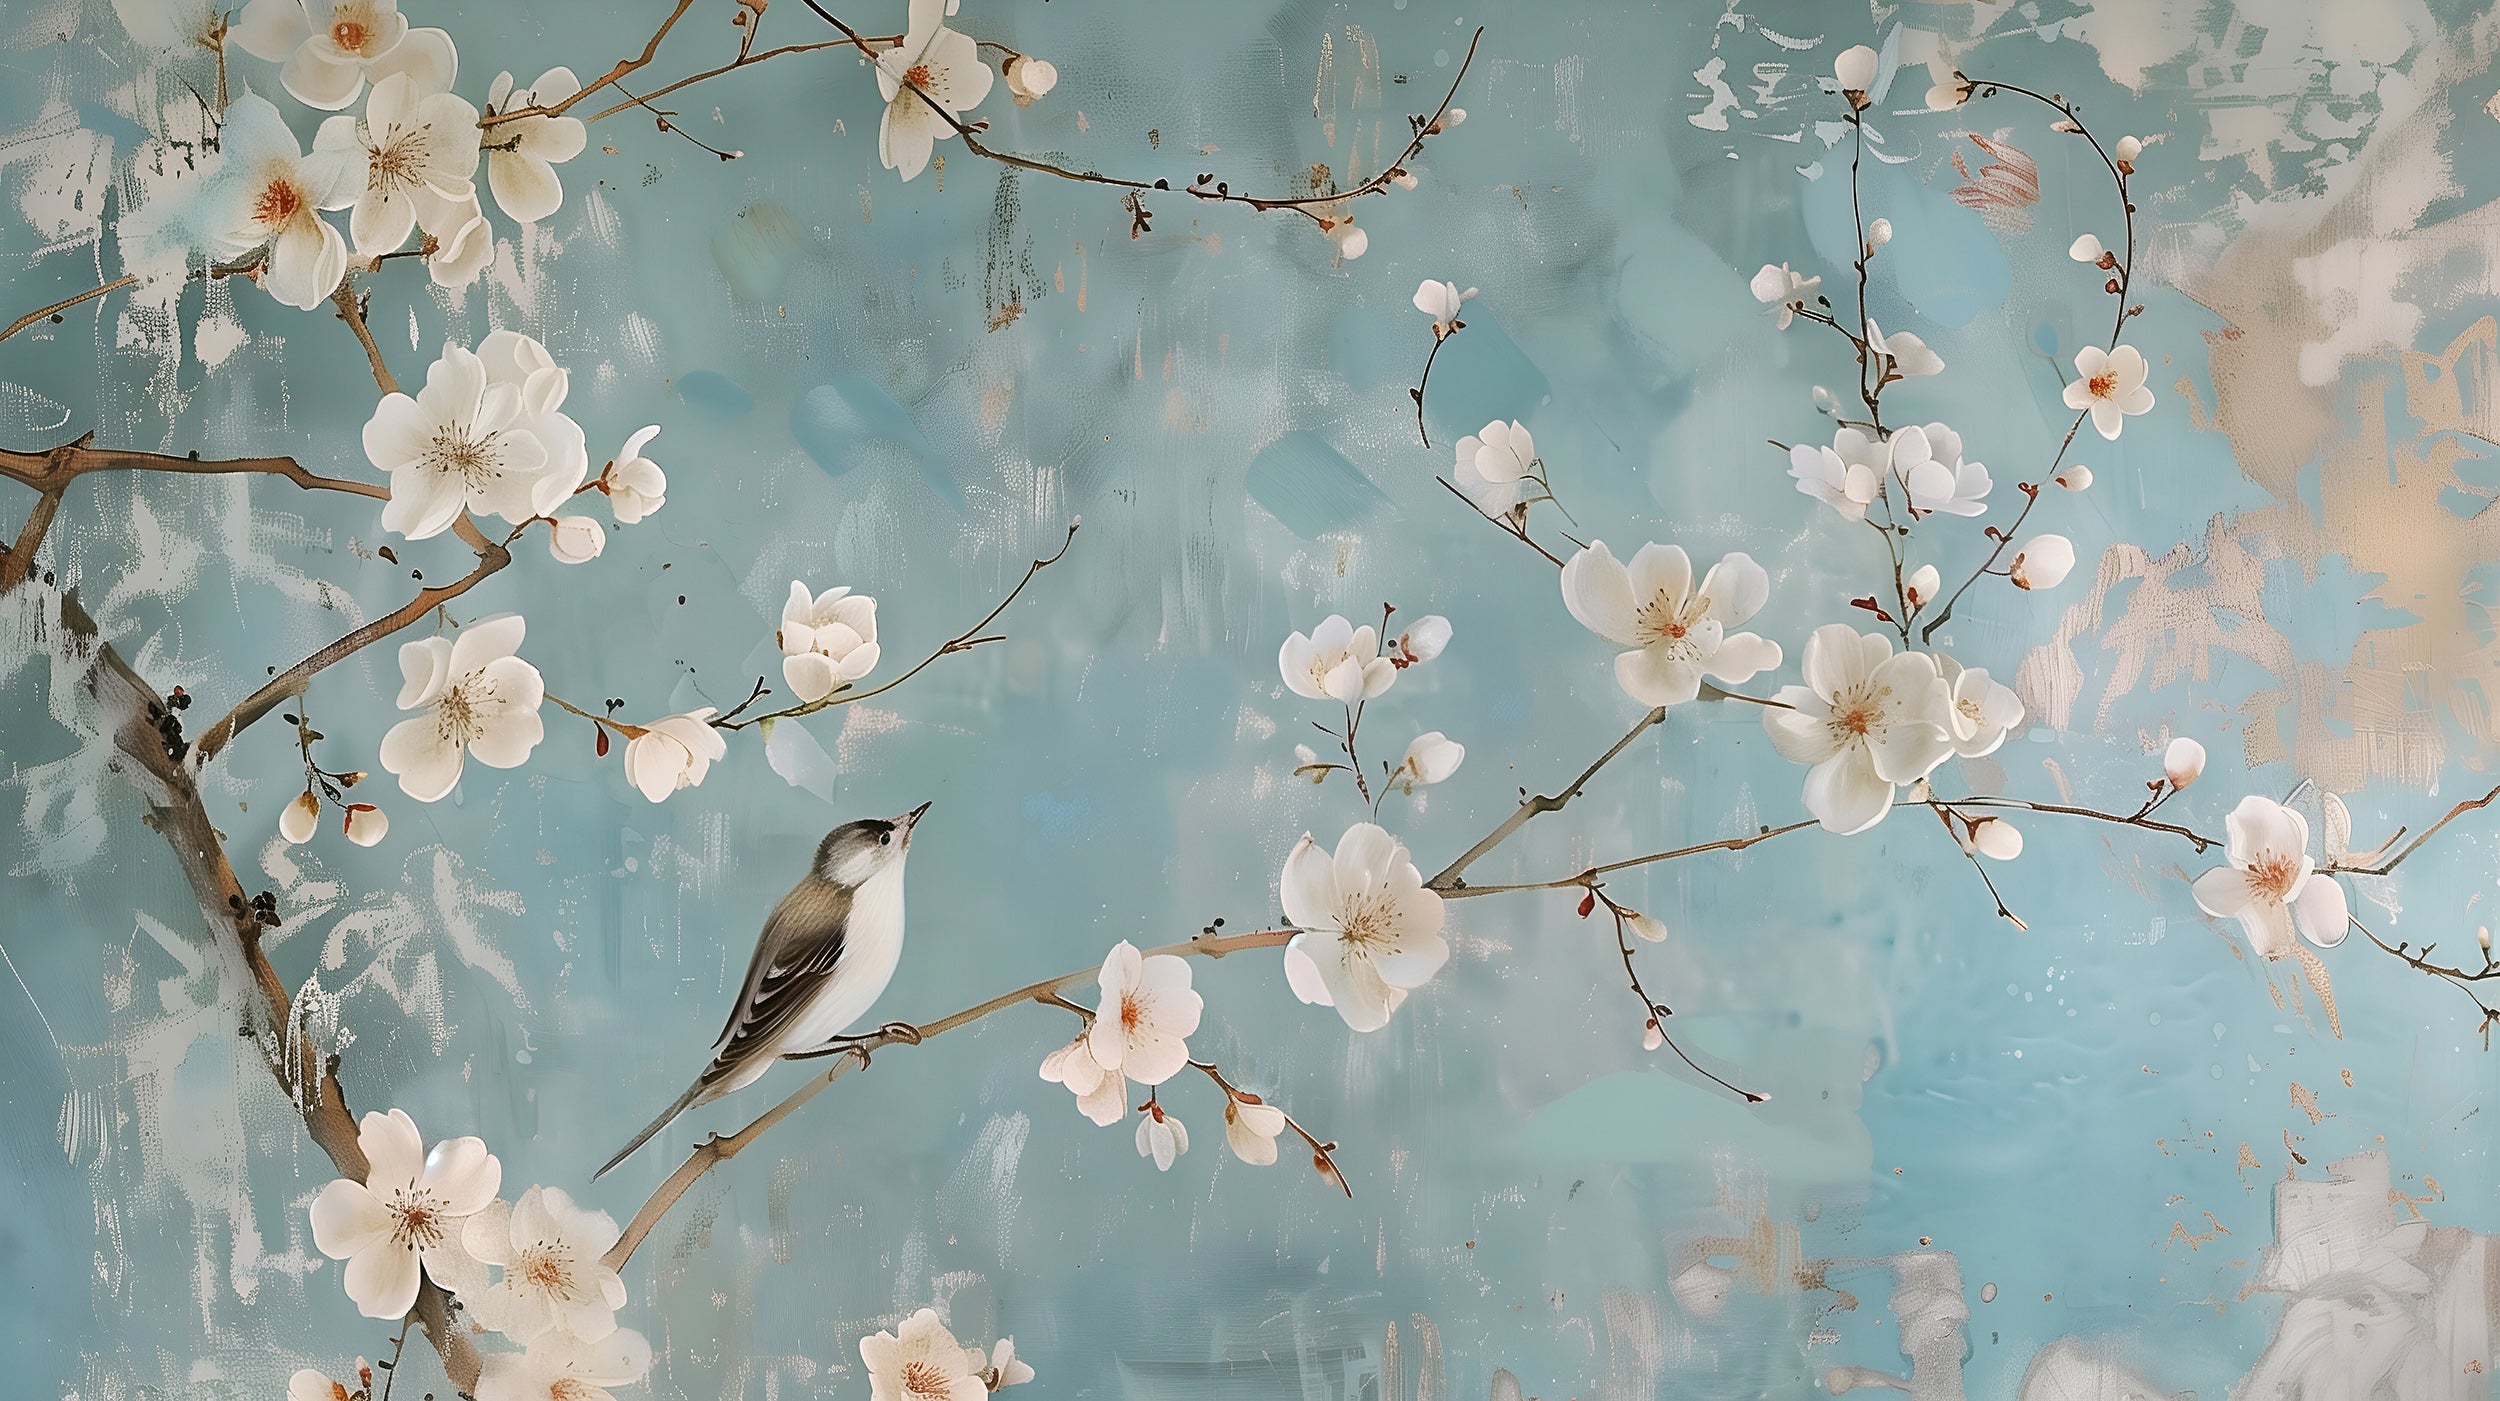 Soft Blue Chinoiserie Mural, Delicate Botanical Wallpaper, Peel and Stick Floral Wall Decor, Flowers and Birds Japanese Wall Art